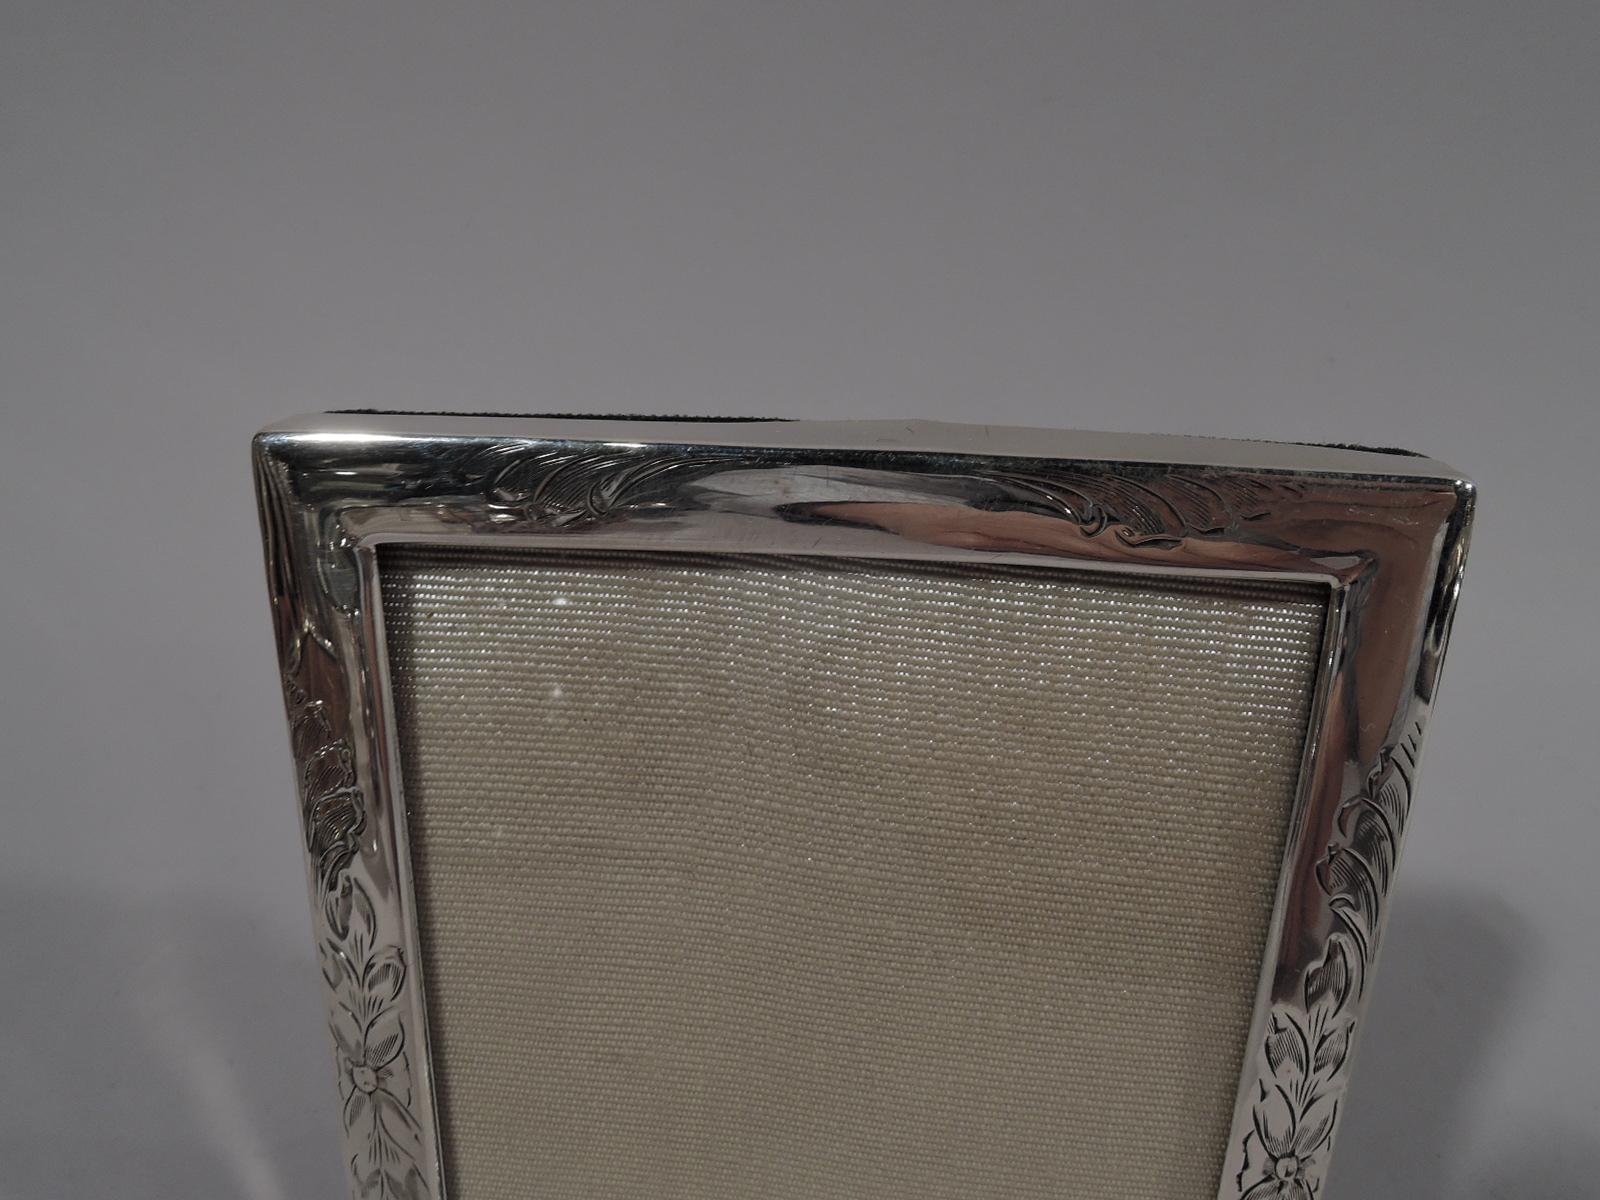 Pretty Art Nouveau sterling silver picture frame. Made by Scharling in Newark, circa 1910. Rectangular window engraved with feathery scrolls and flowers. With glass, silk lining, and velvet back and hinged support for portrait (vertical) display.